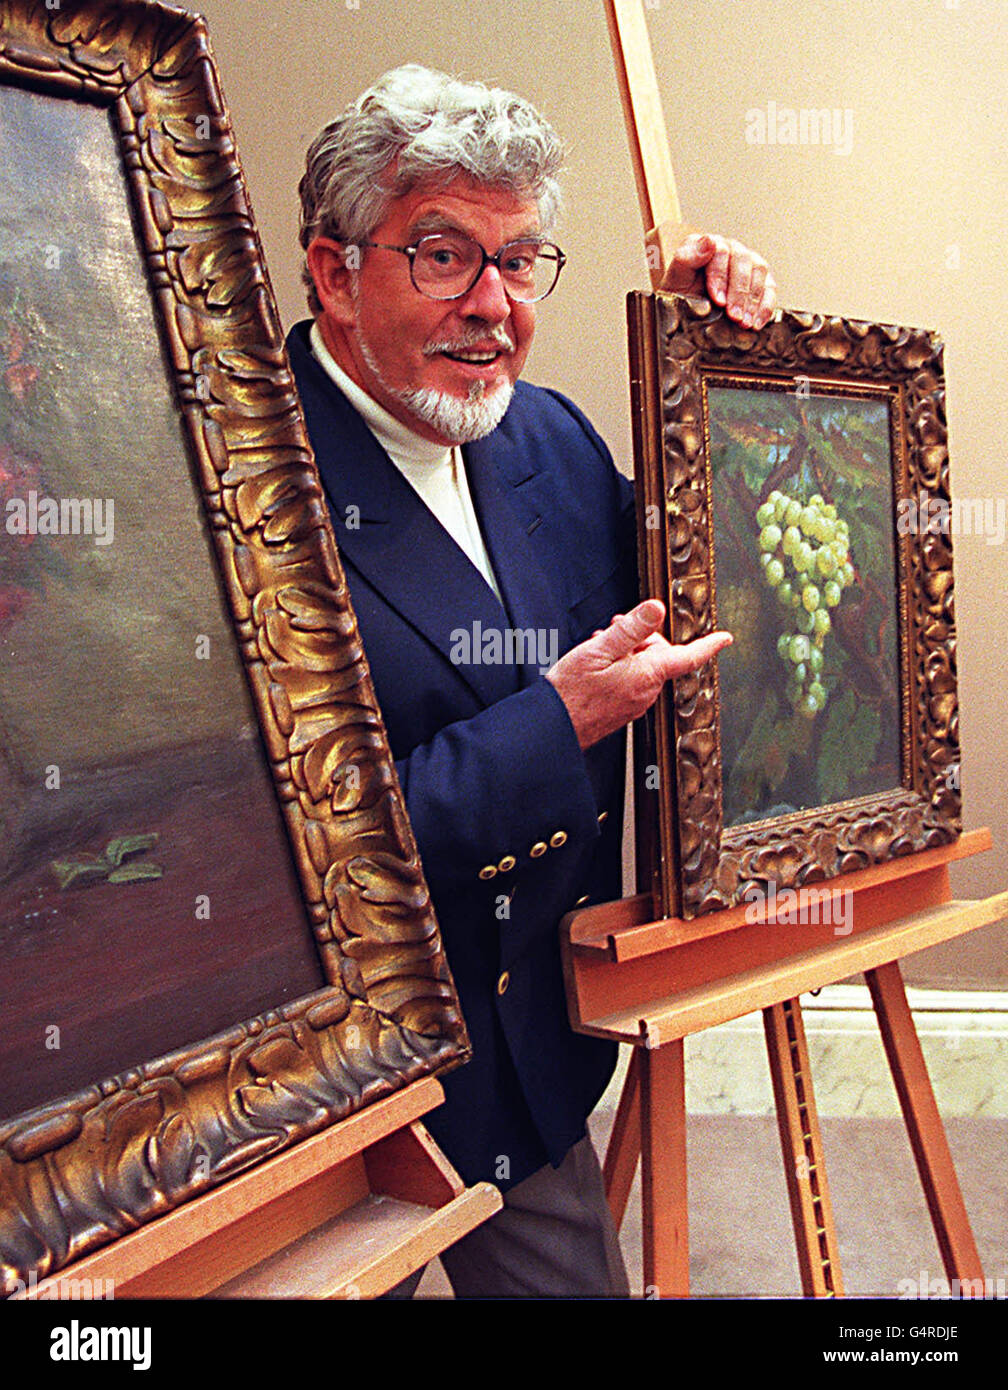 TV presenter and entertainer Rolf Harris with some of his grandfather's paintings at Sotheby's in London. George Harris sold the paintings in 1920 to pay for his trip to Australia, which are due to be auctioned in Sotheby's first Welsh Sale, in Wales on 19-20/10/1999. Stock Photo